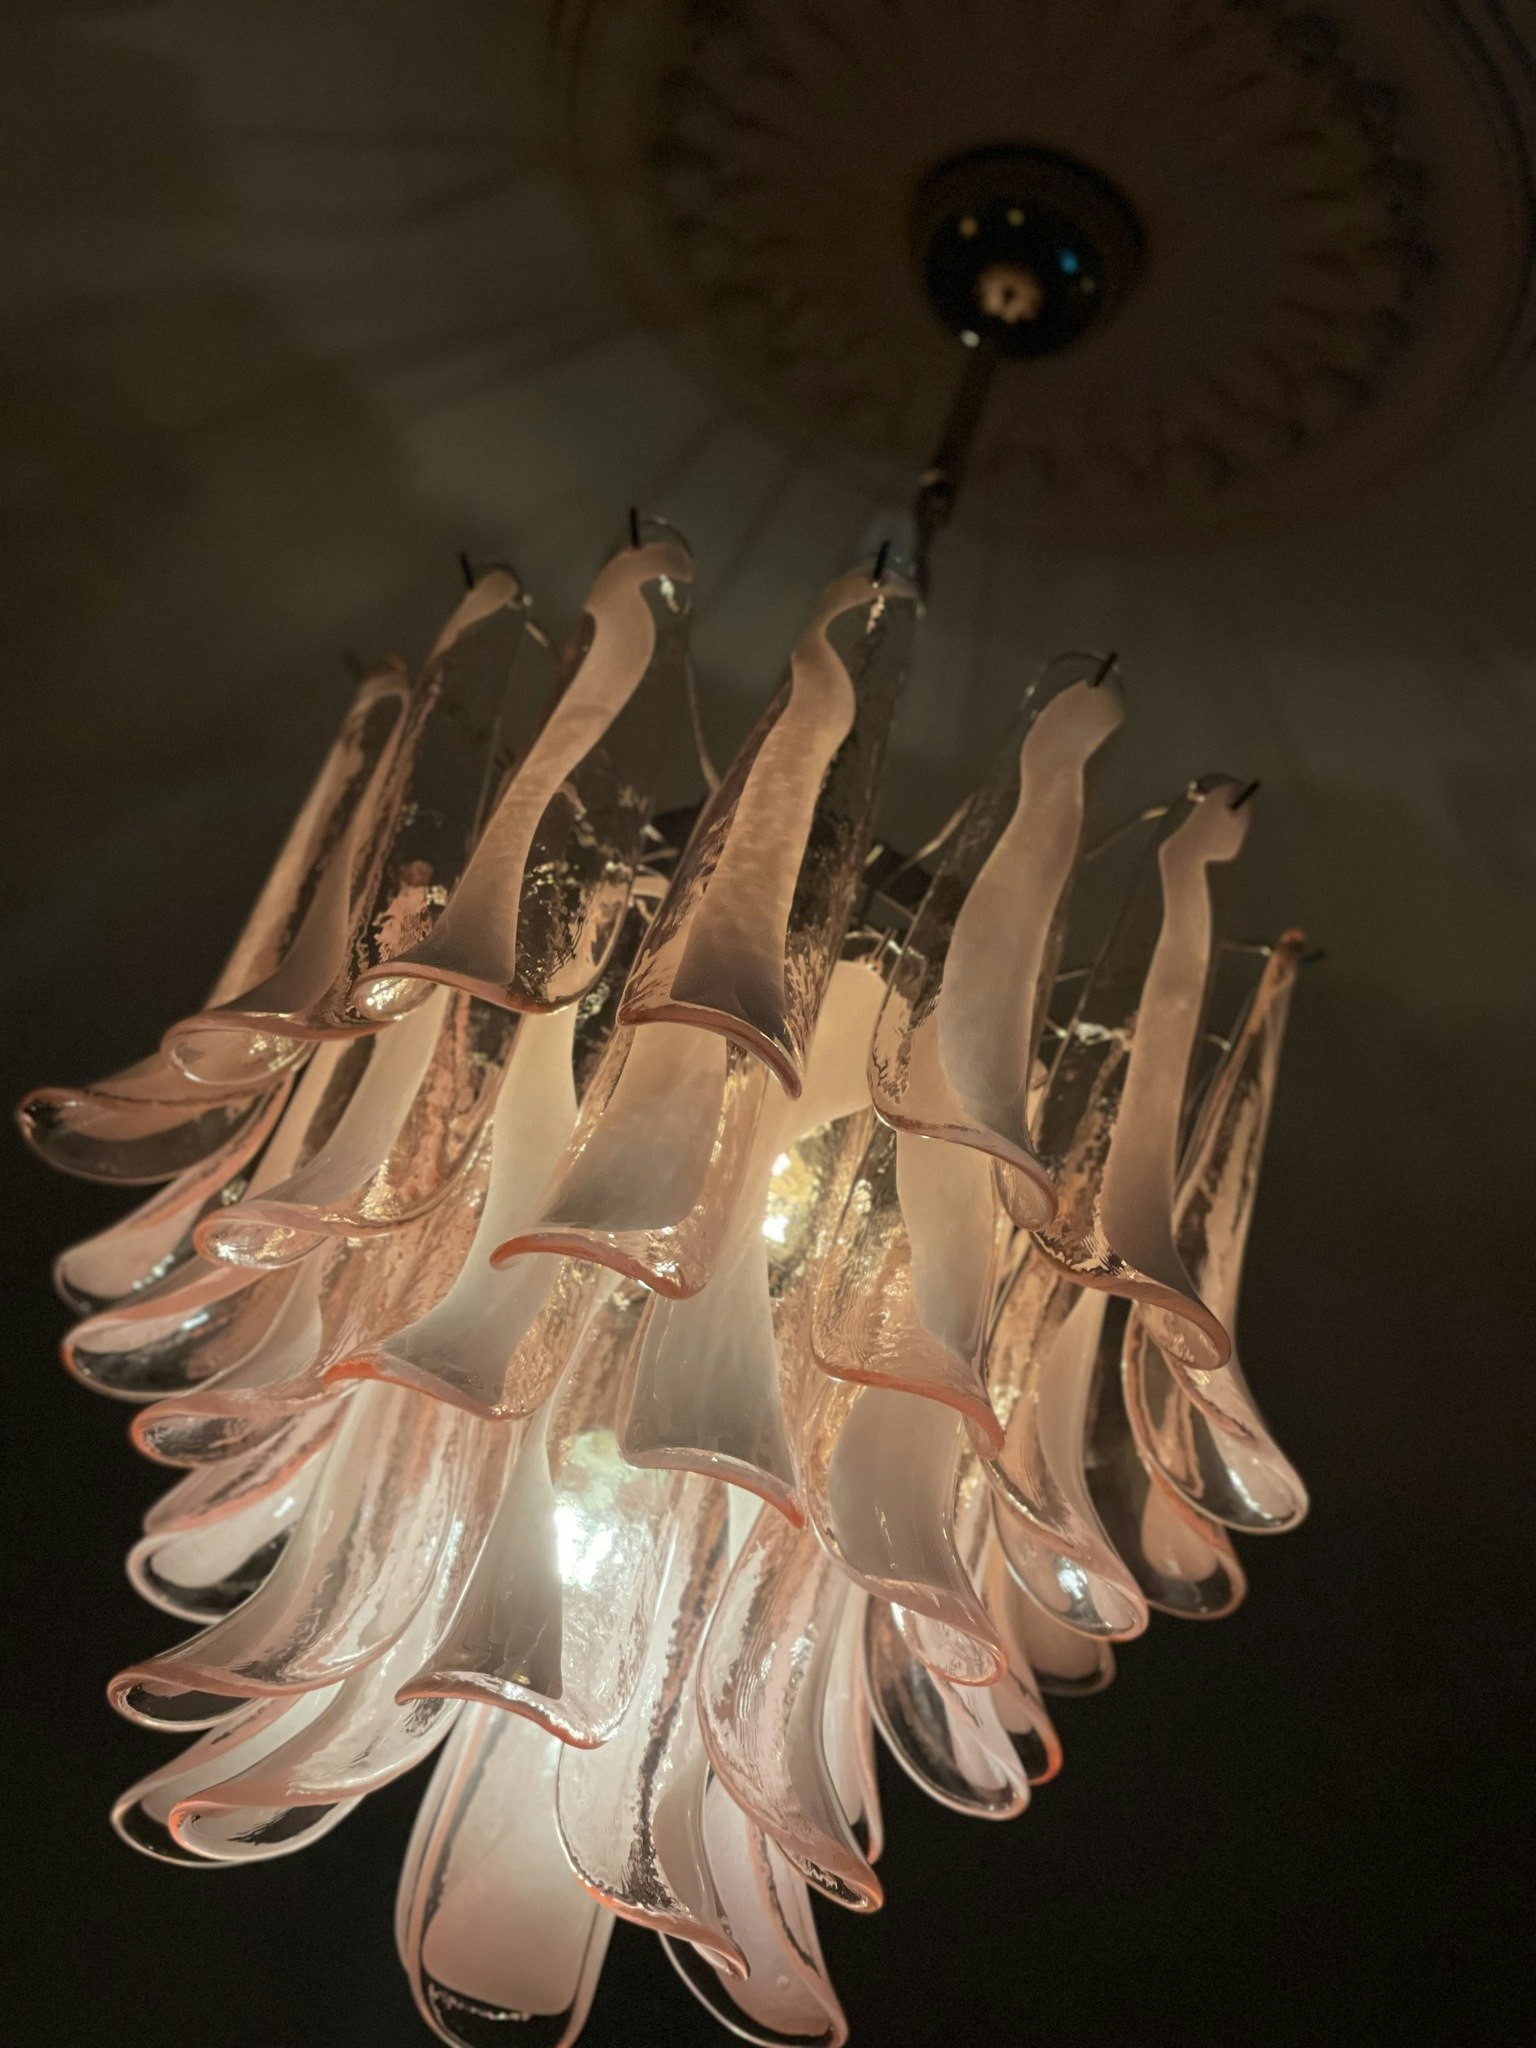 Pink Murano Glass Chandelier in the style of Mazzega - Large size.